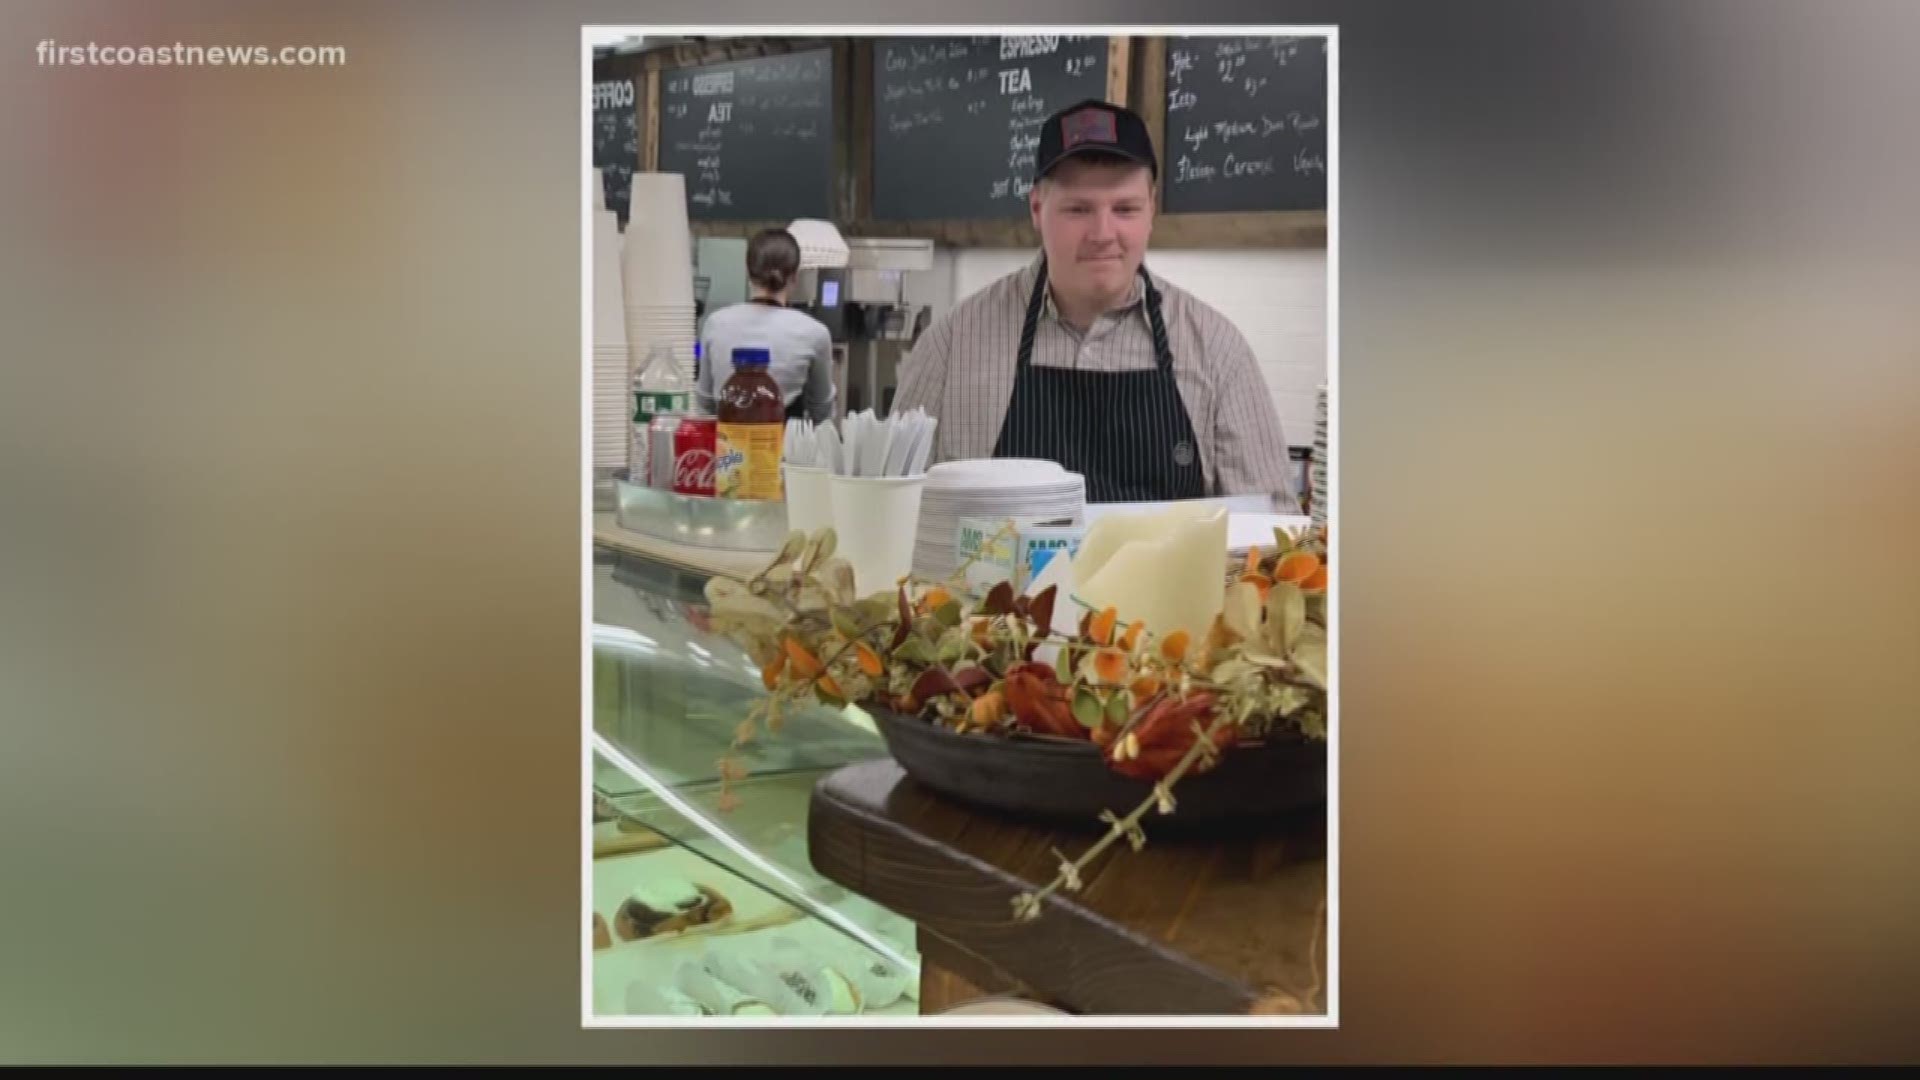 In Rhode Island, a young man with autism got tired of getting rejected when searching for a job. So he opened his own business with a heartwarming twist.